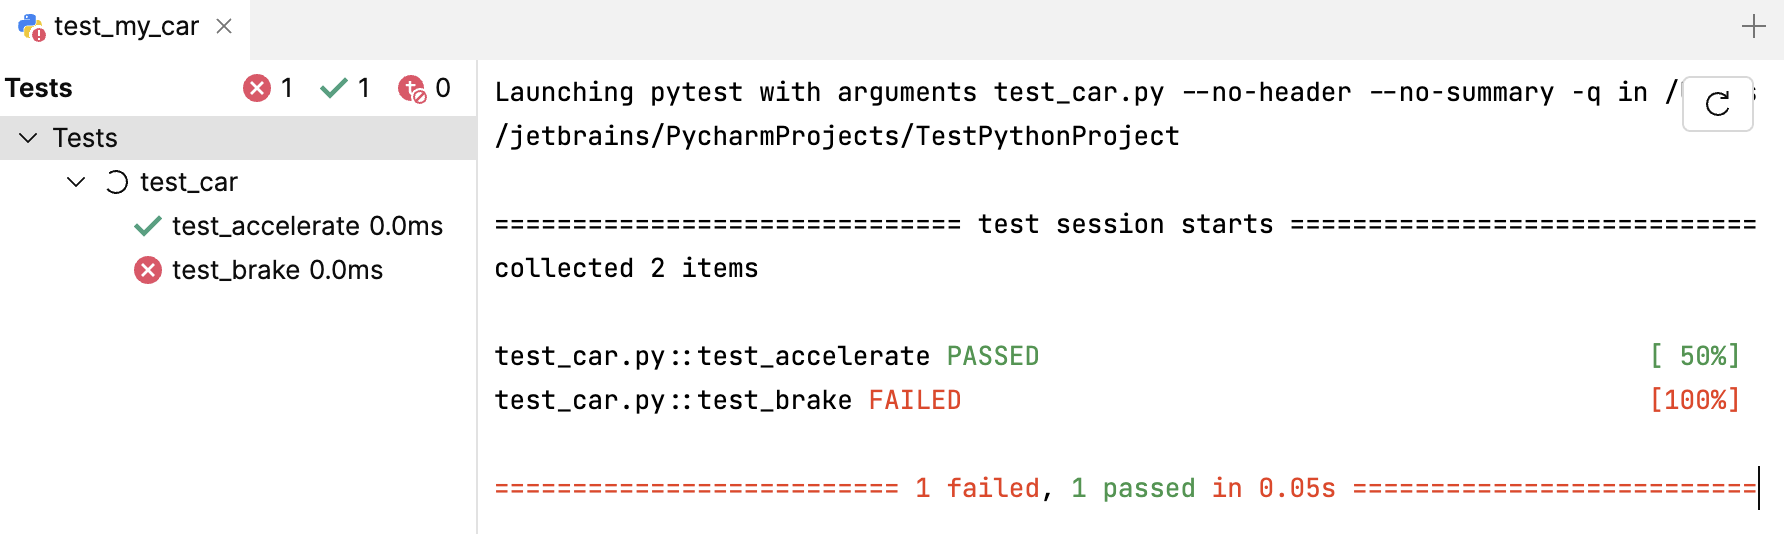 Pytest results in terminal